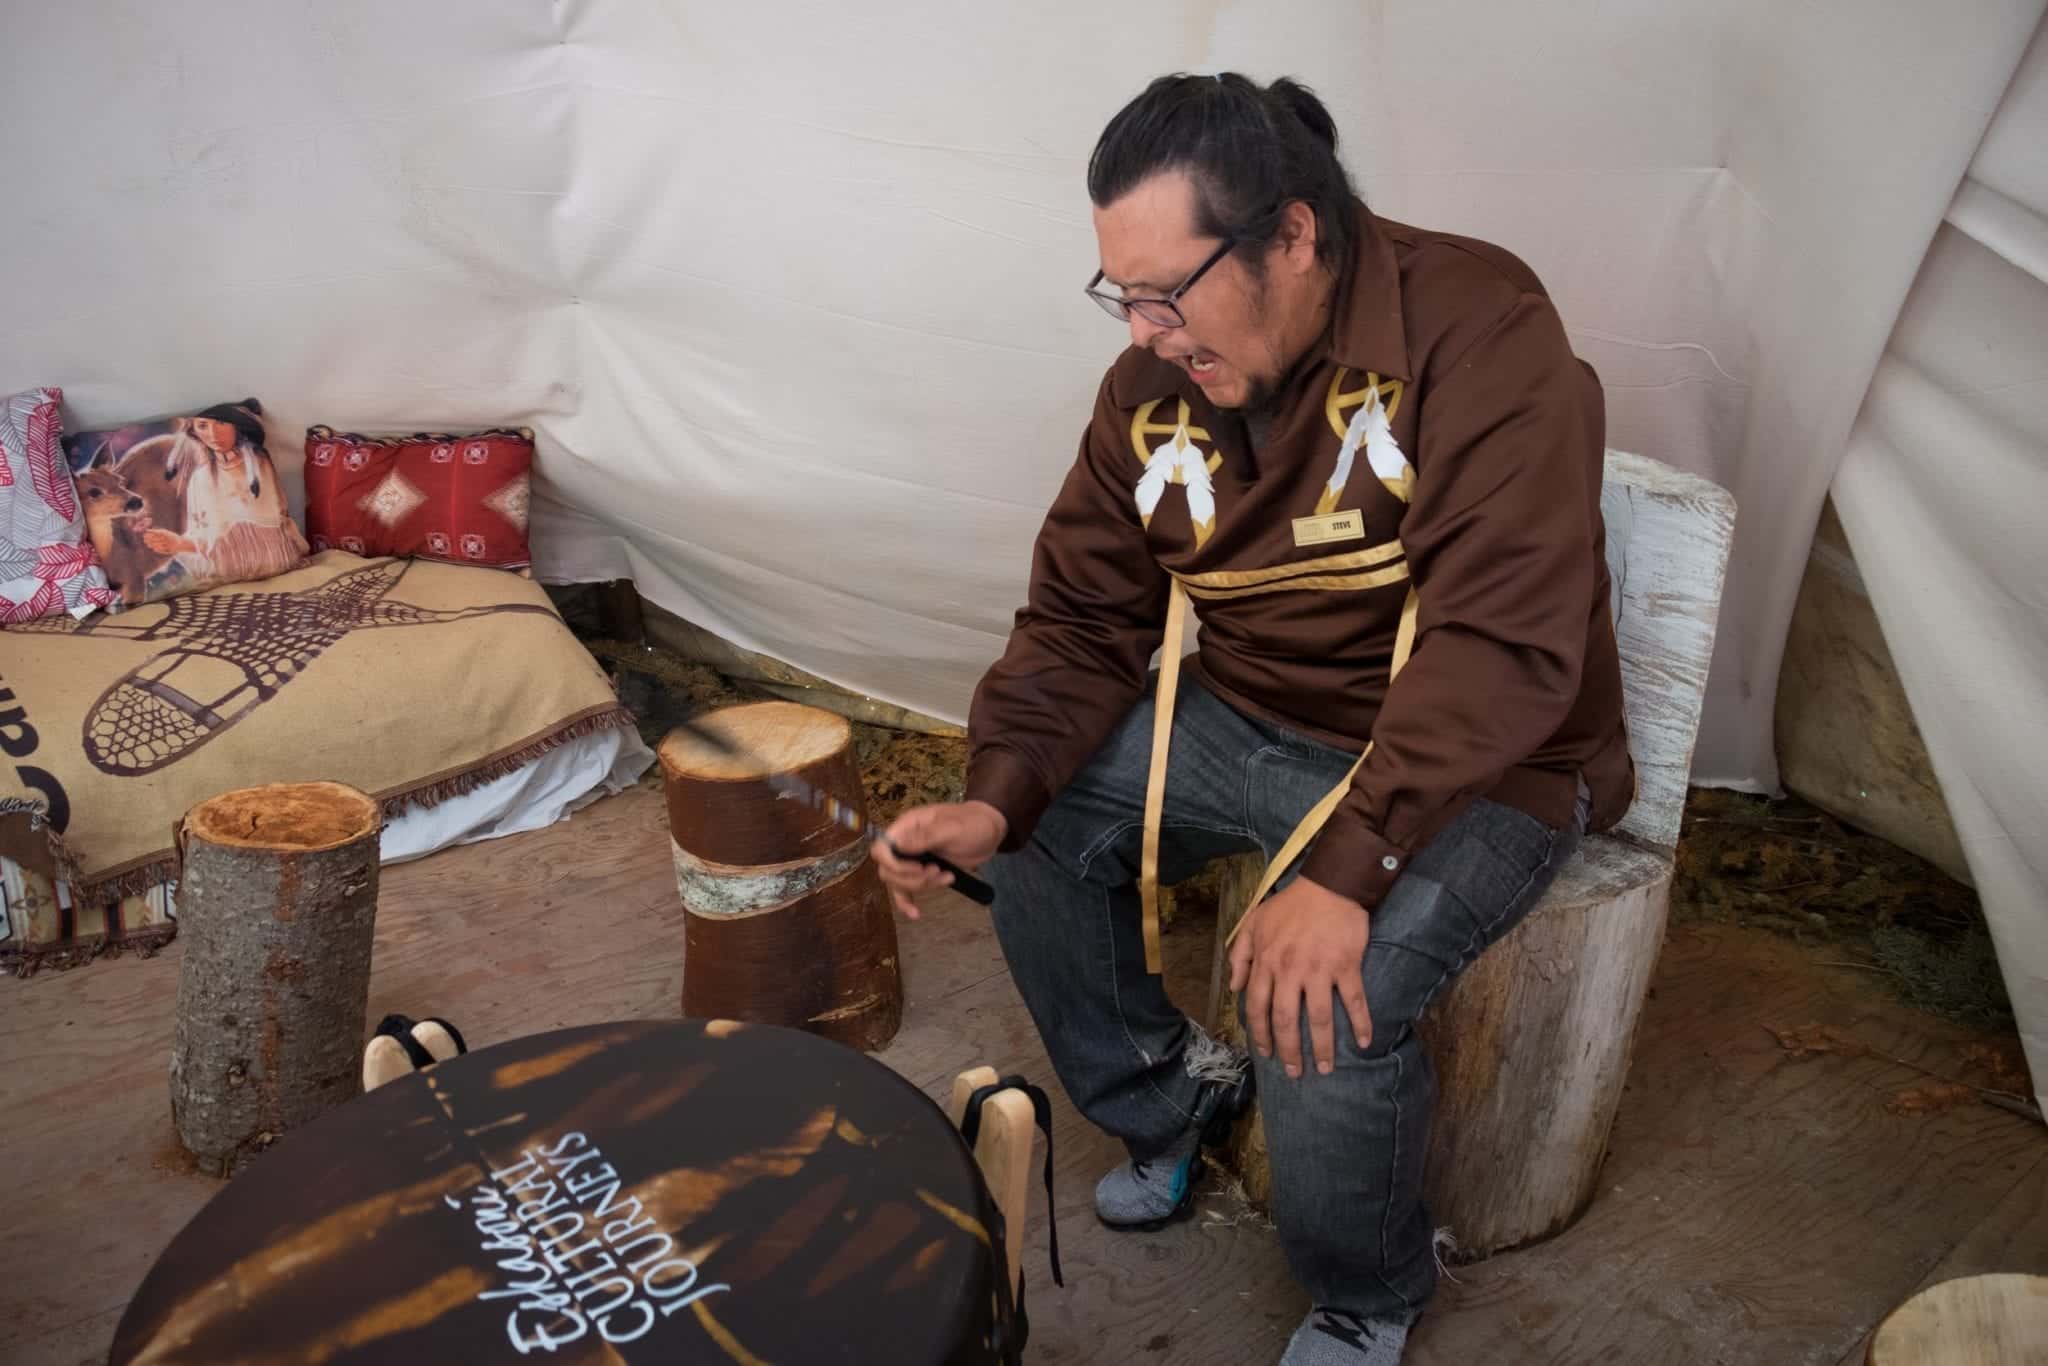 A Mi'kmaq man plays a drum and sings.